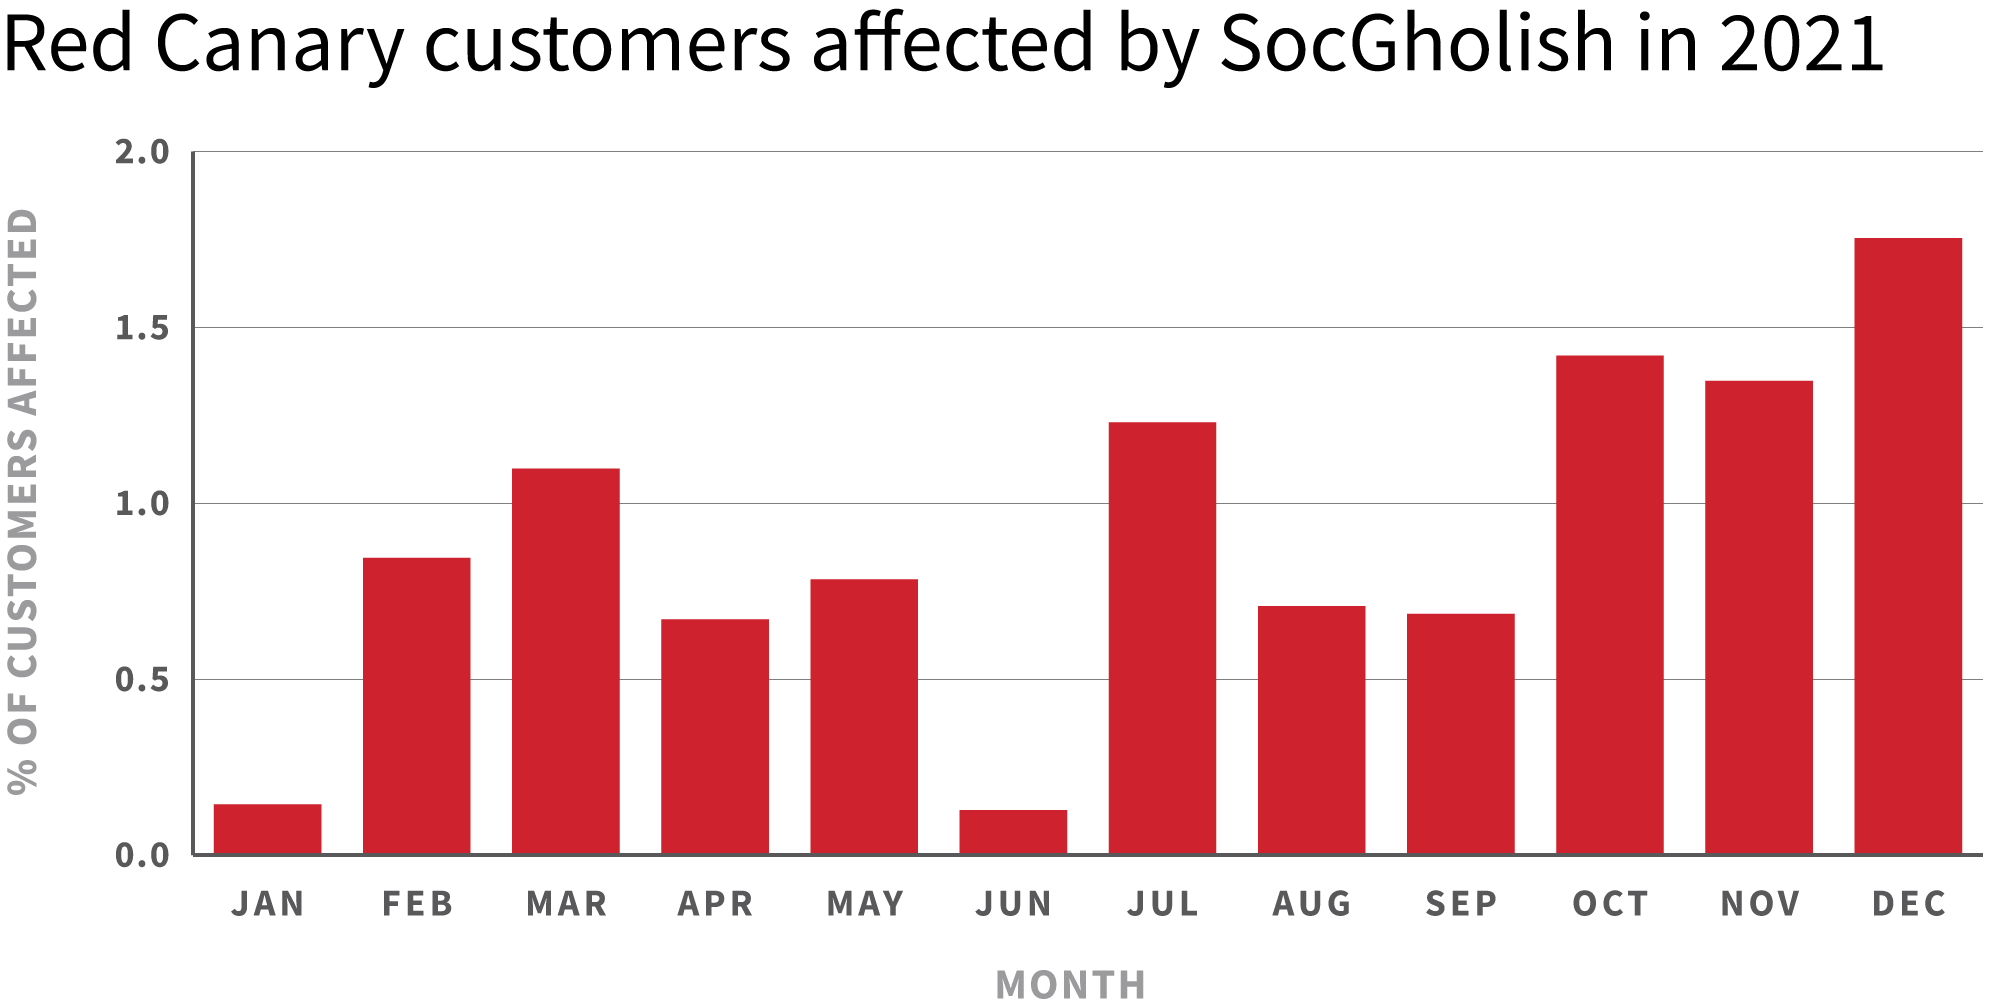 Red Canary customers affected by SocGholish in 2021